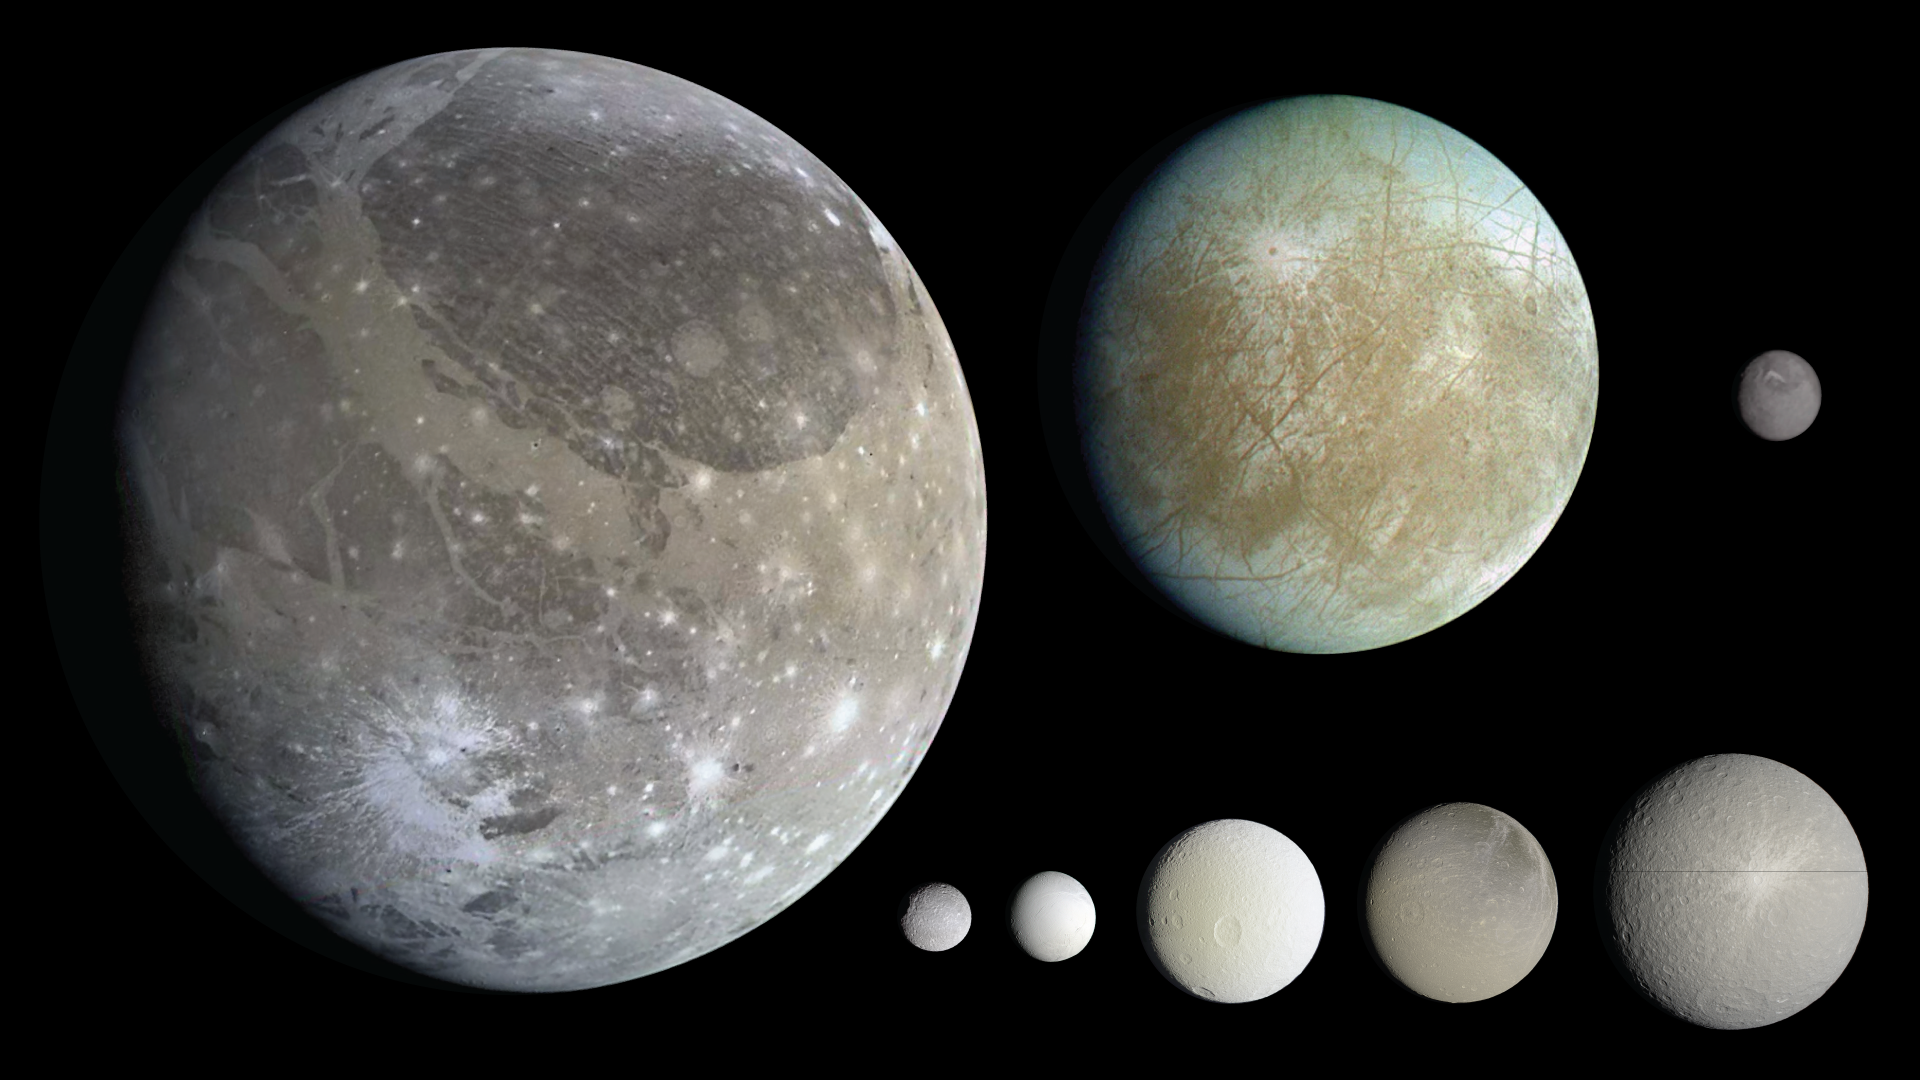 moons of our planets